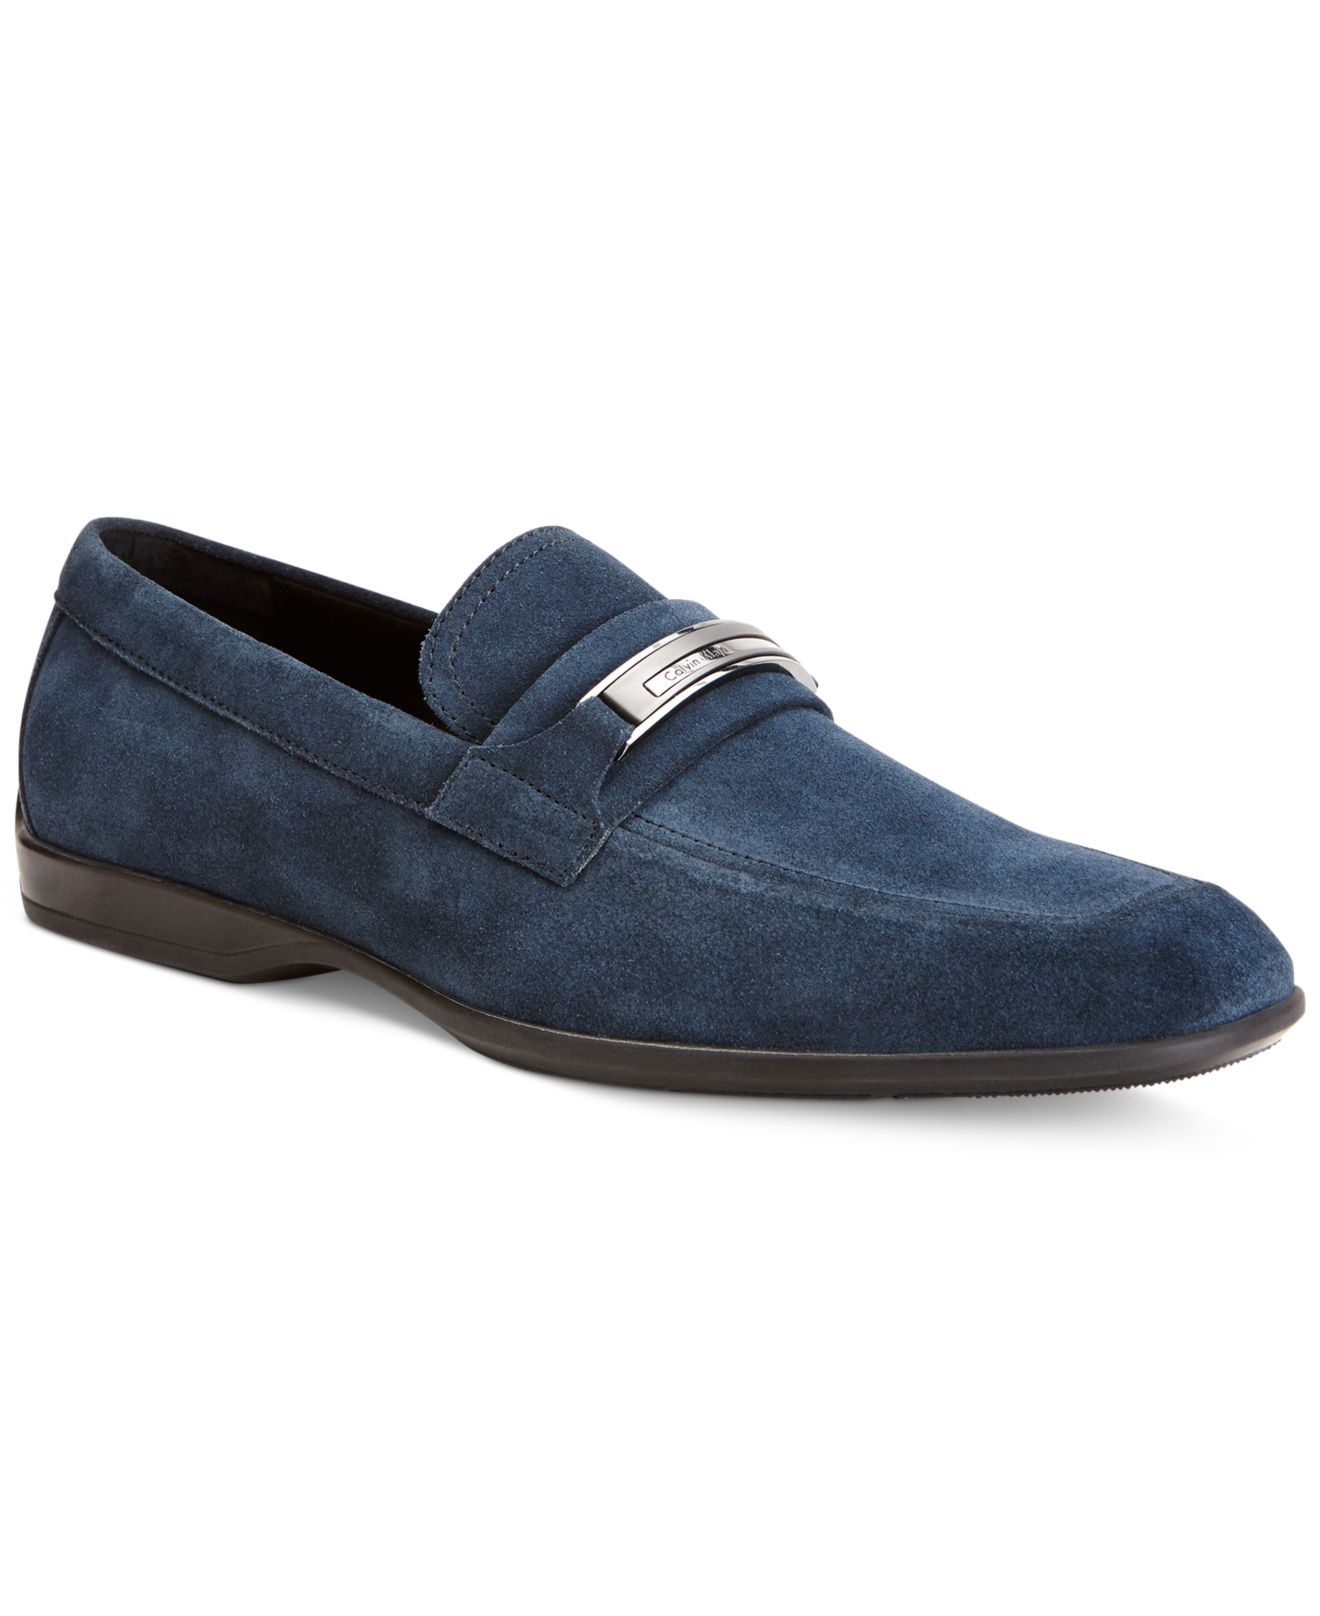 Calvin Klein Vick Suede Bit Loafers in Blue for Men - Lyst